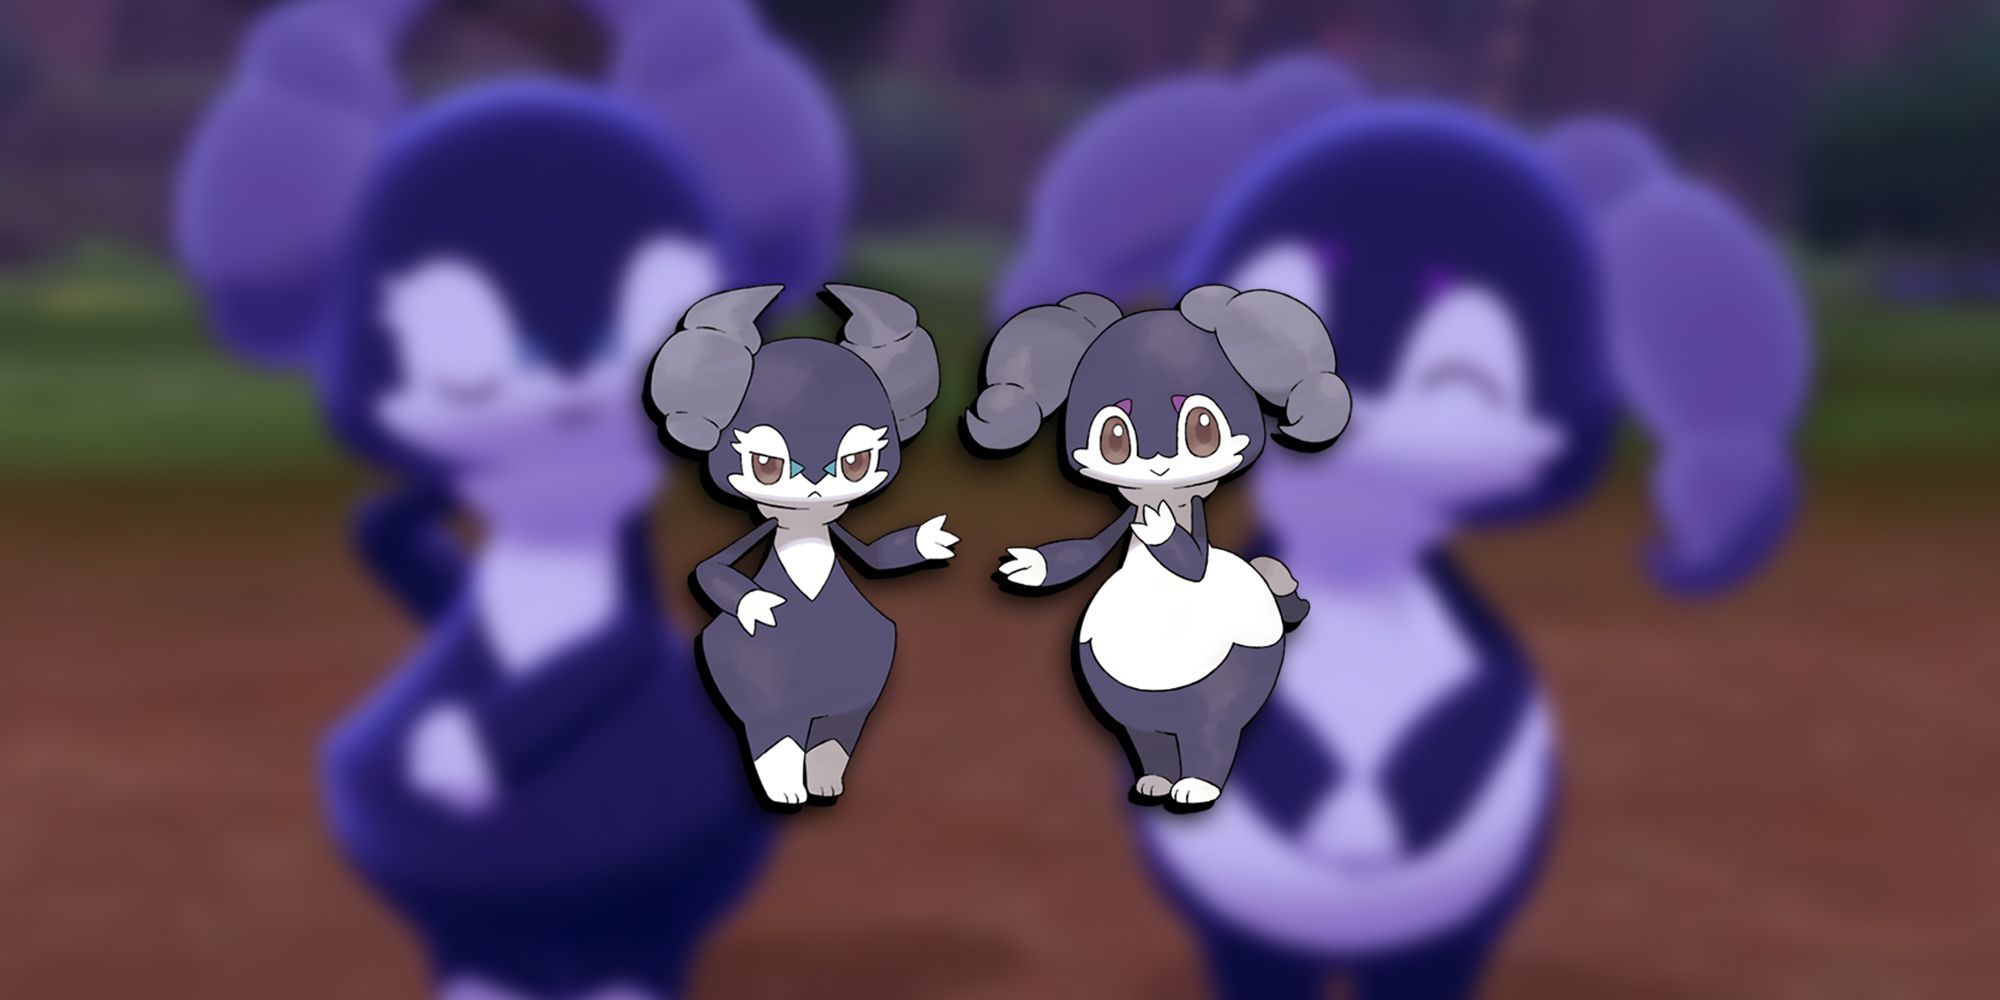 Pokemon - Both Indeedee Forms Looking Very Cute In Pokemon Sword And Shield With Their Official Art PNGs Overlaid On Top